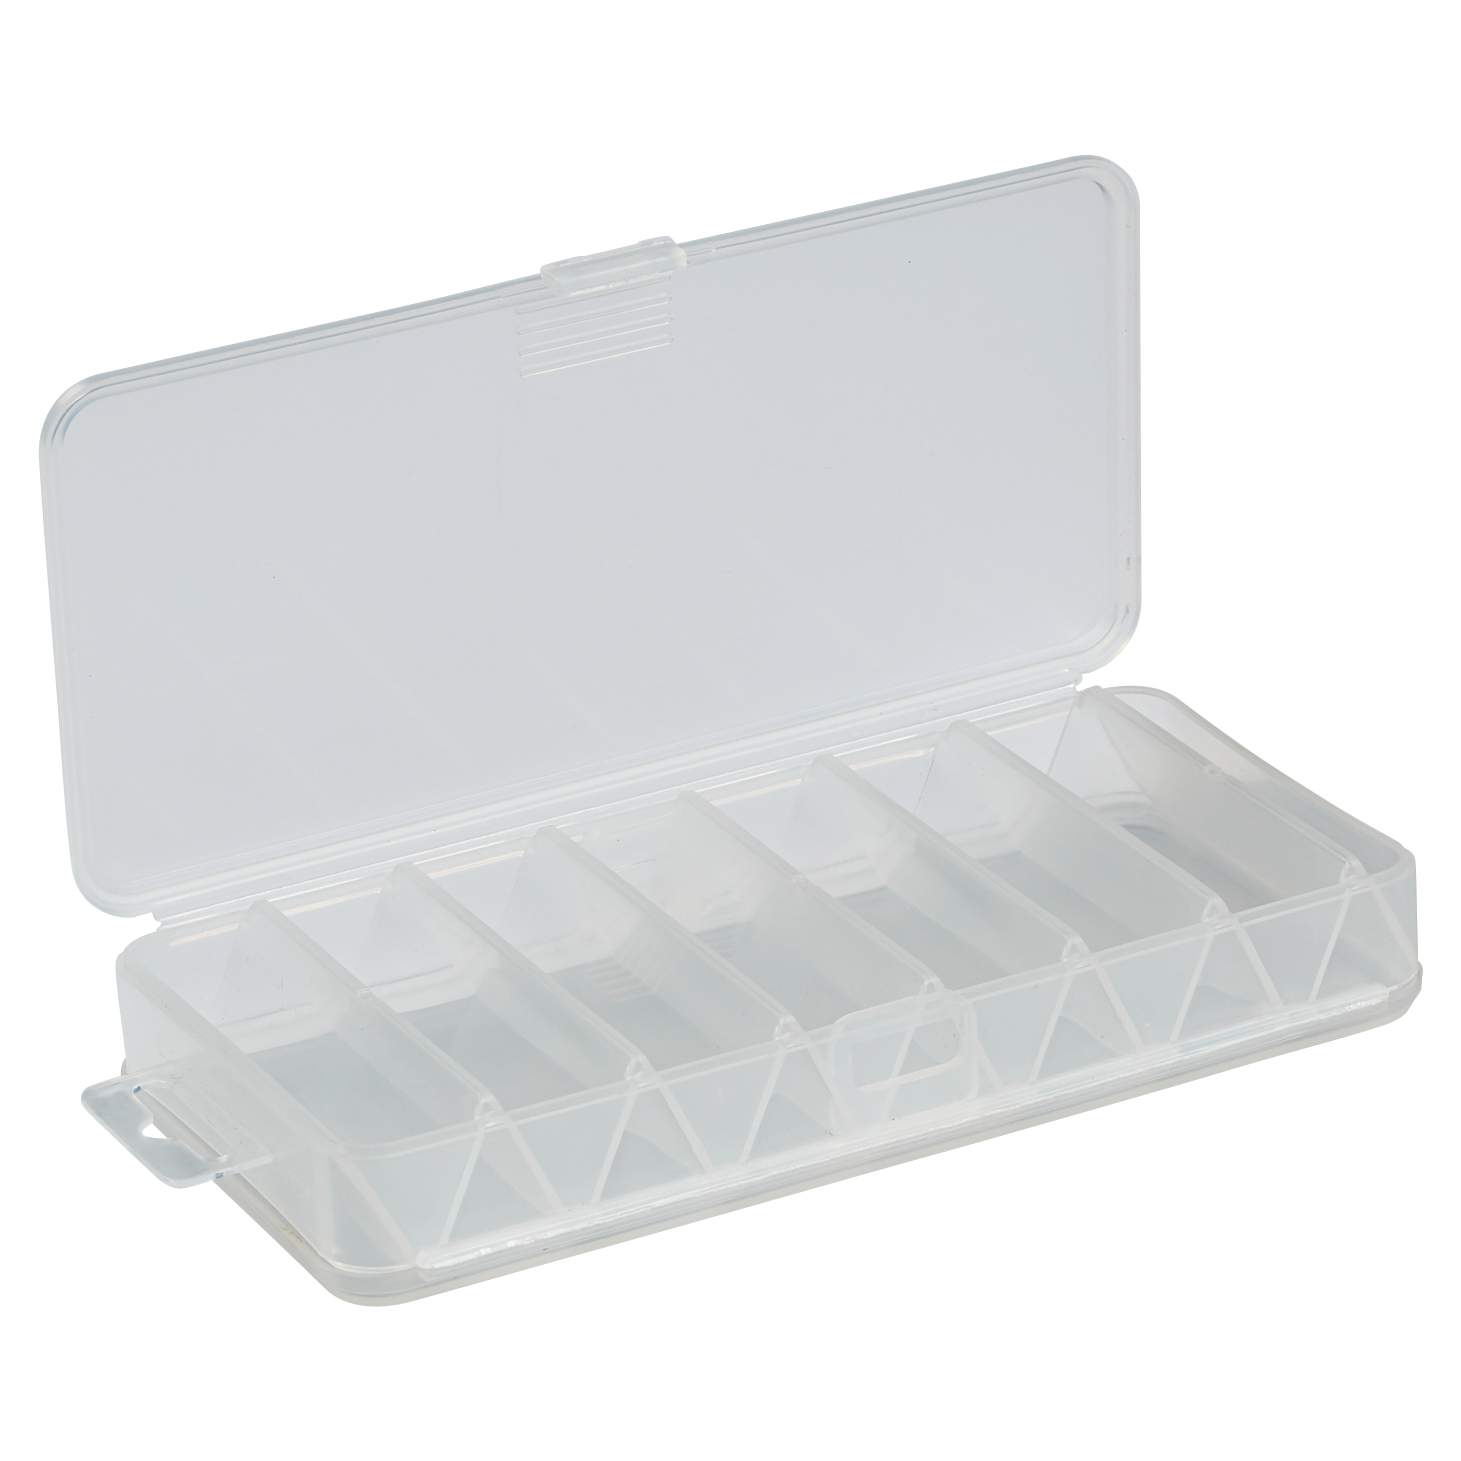 Kogha Tackle Box (L) at low prices